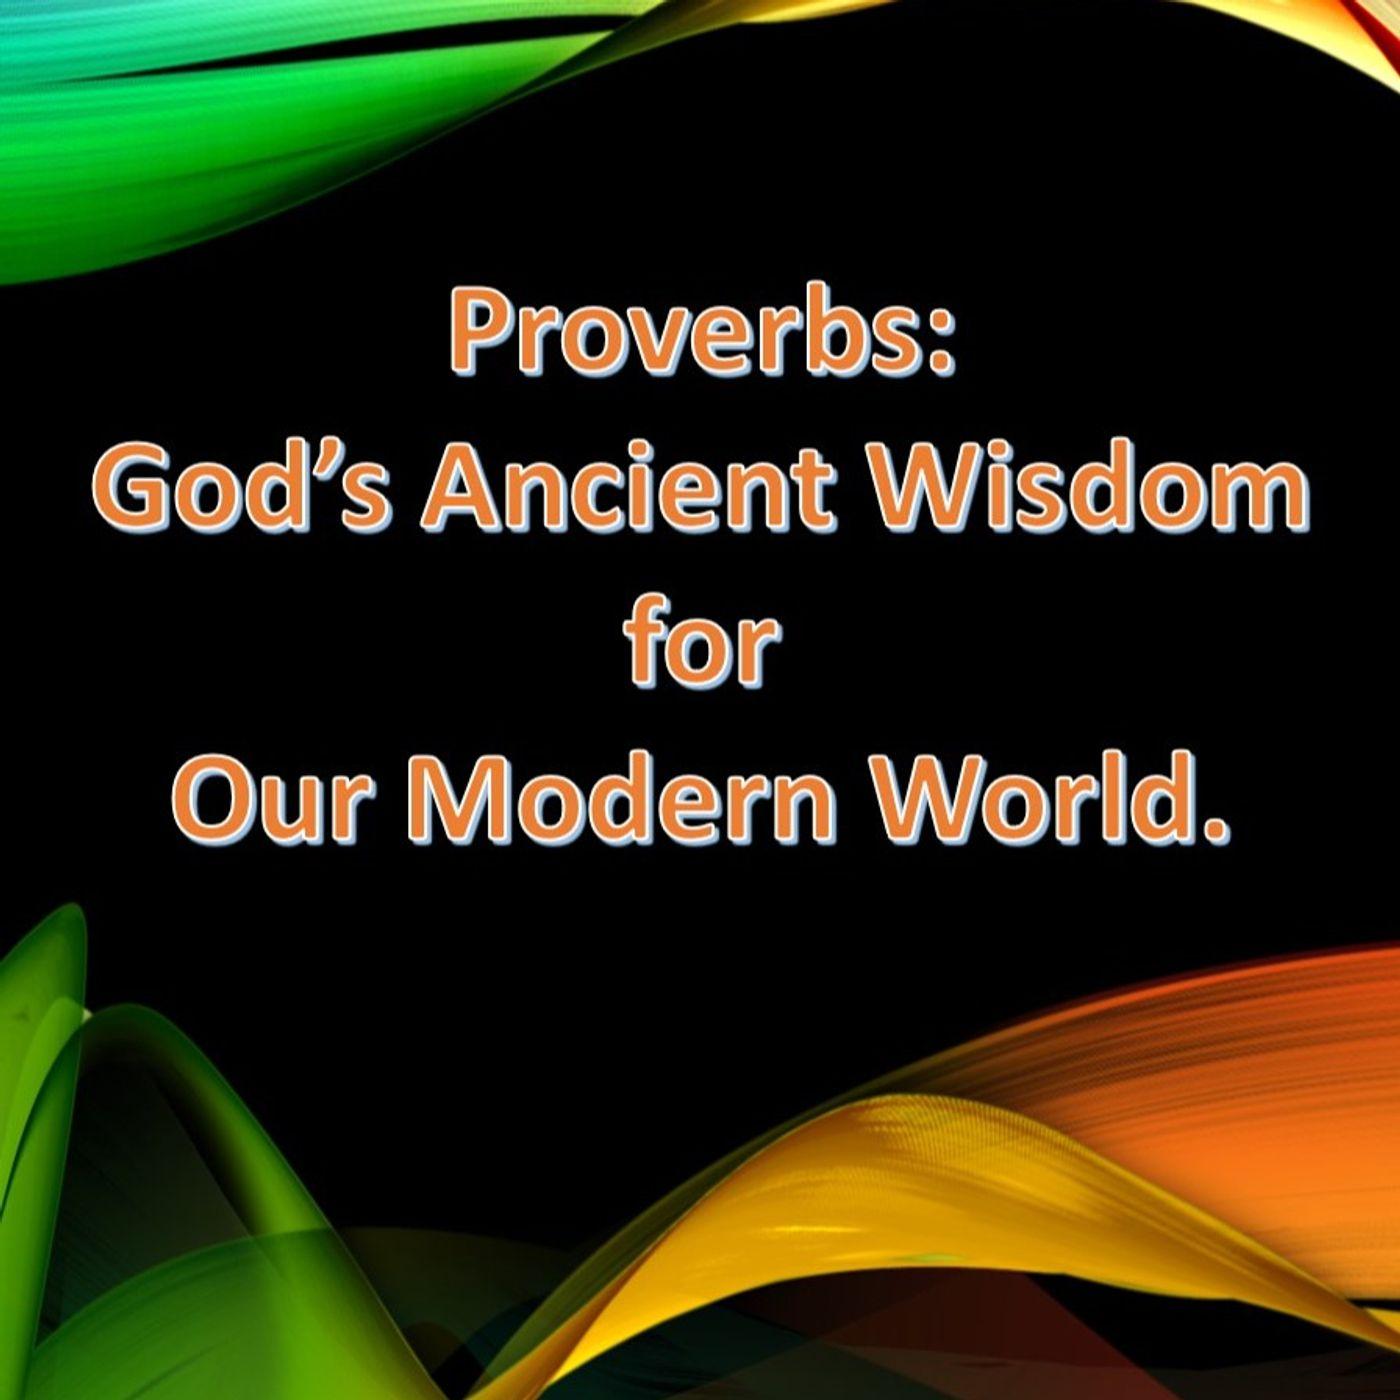 Episode 6 of Proverbs: God's Ancient Wisdom for our Modern World ...